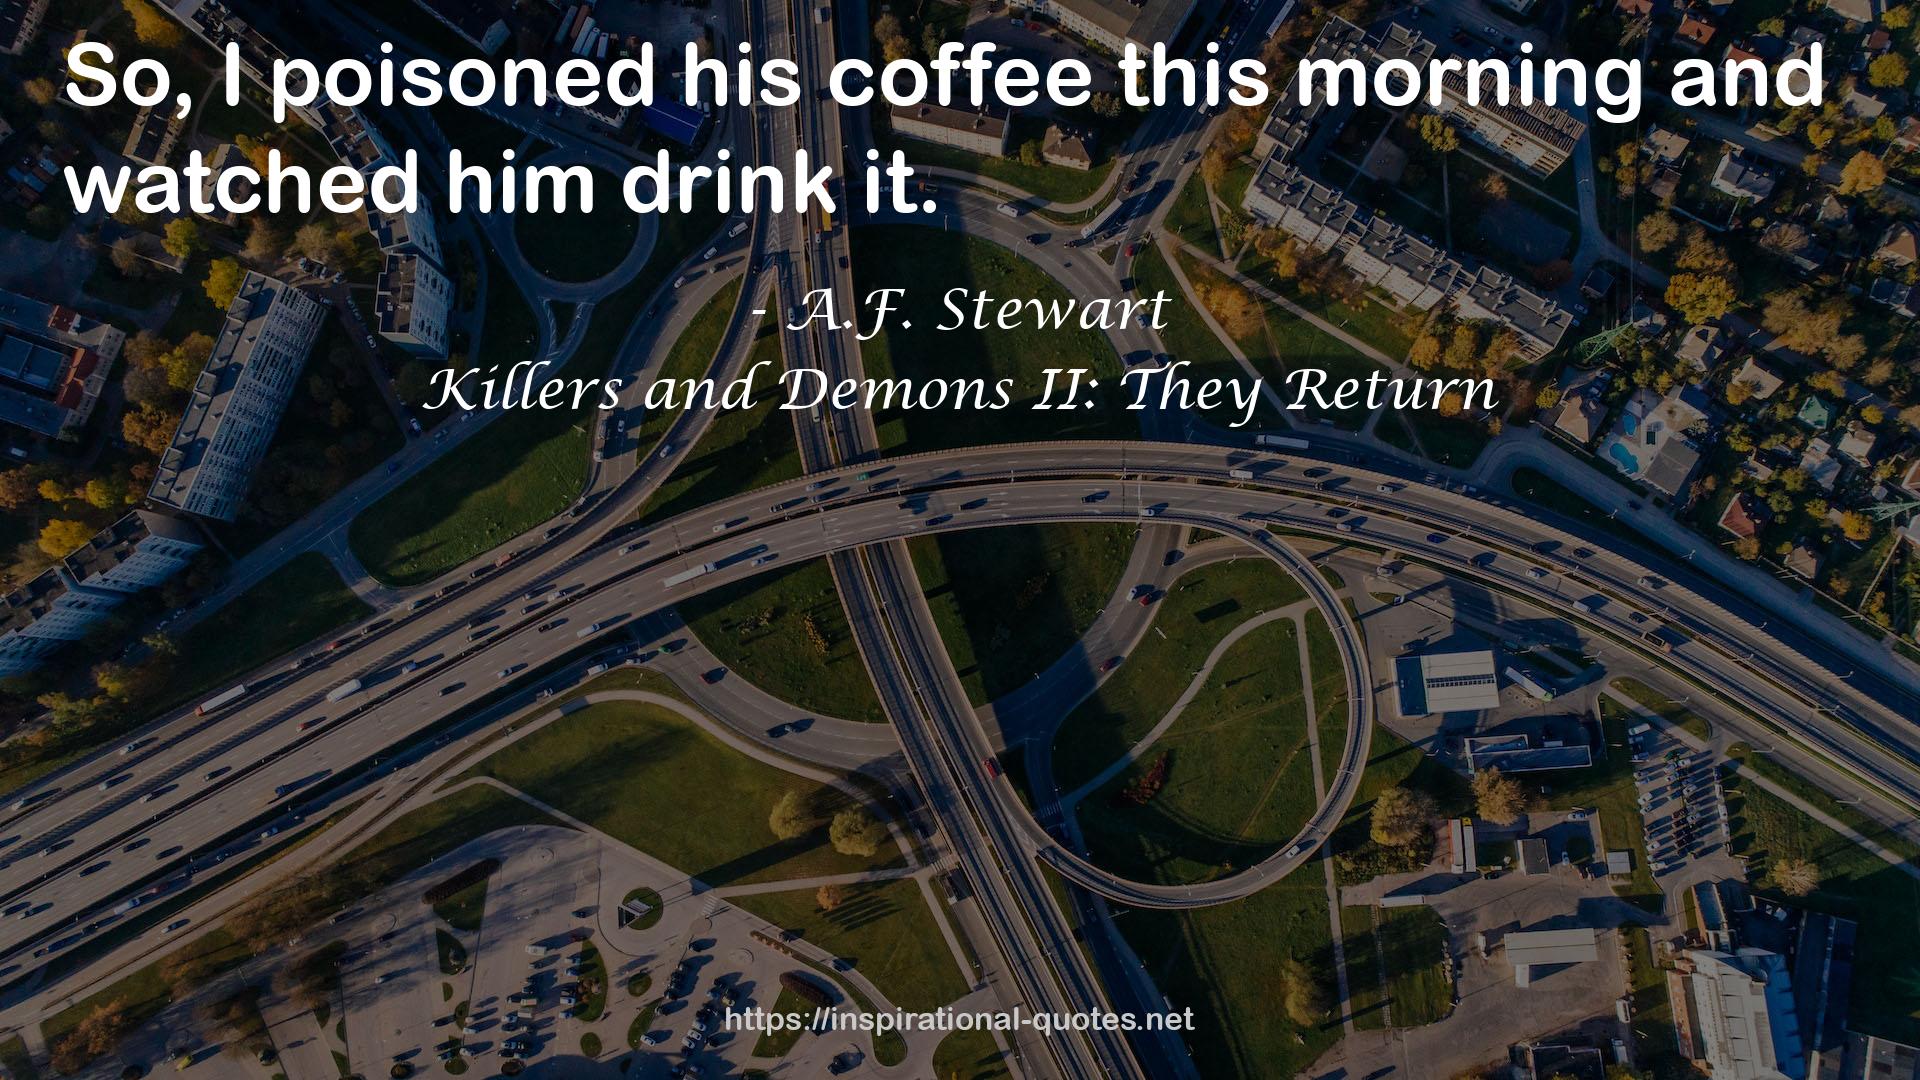 Killers and Demons II: They Return QUOTES